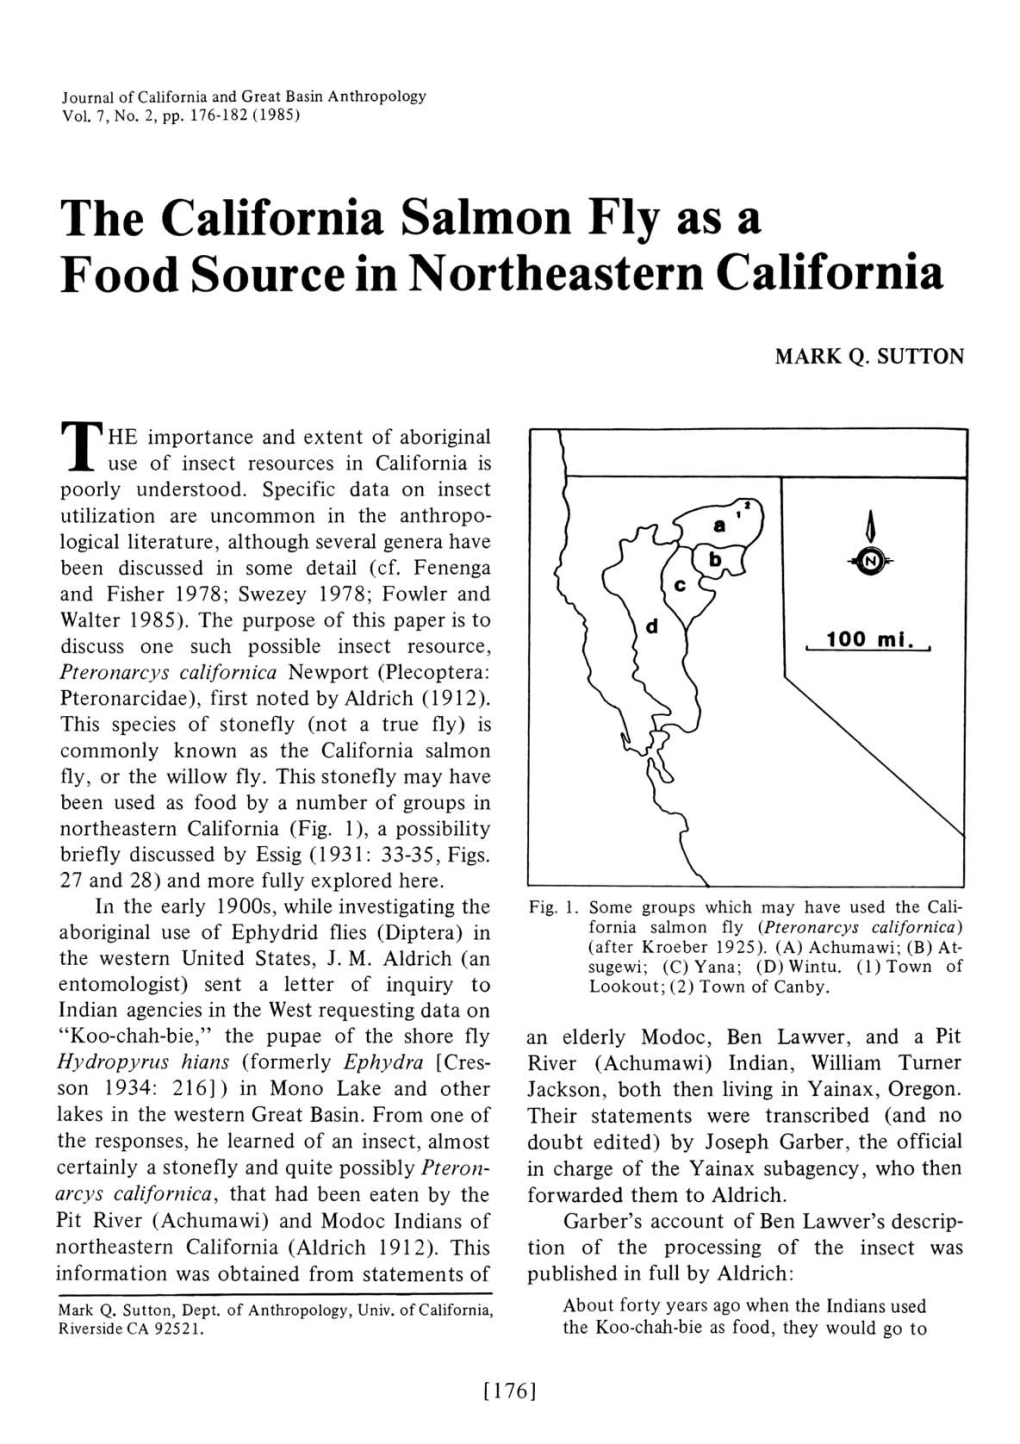 The California Salmon Fly As a Food Source in Northeastern California